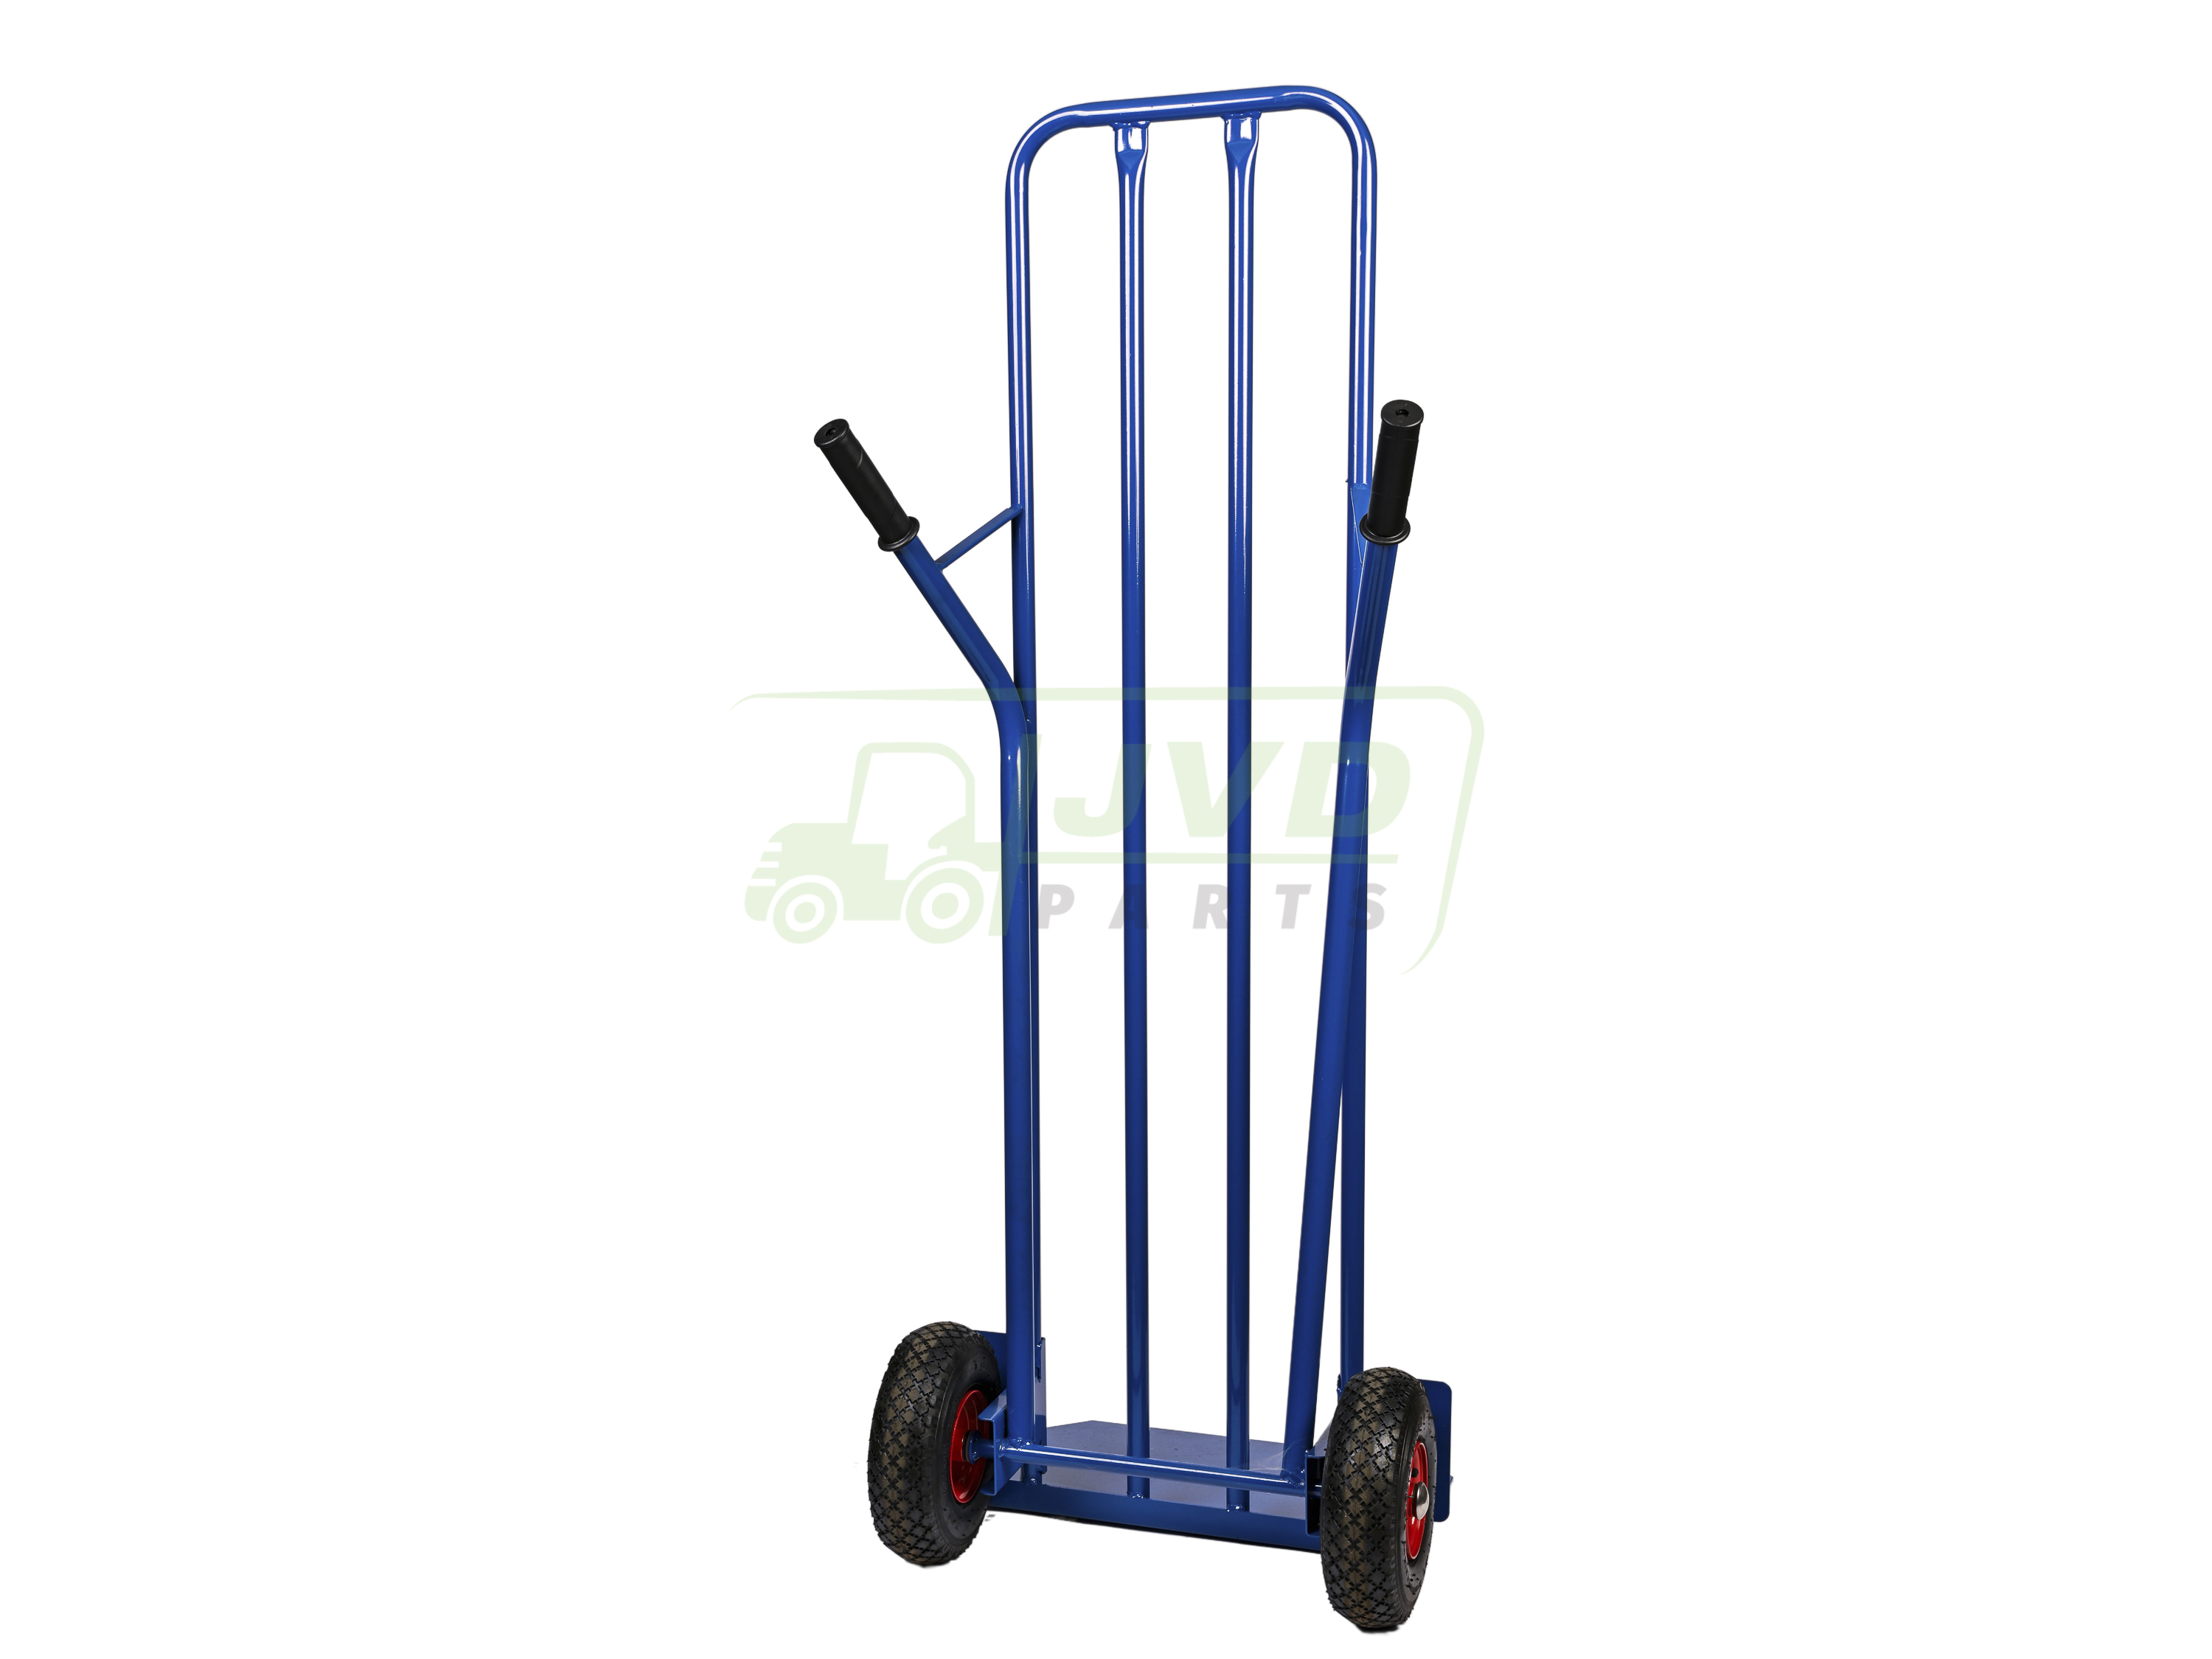 Handtrolley, Height 1500mm - Plate (500x300mm)